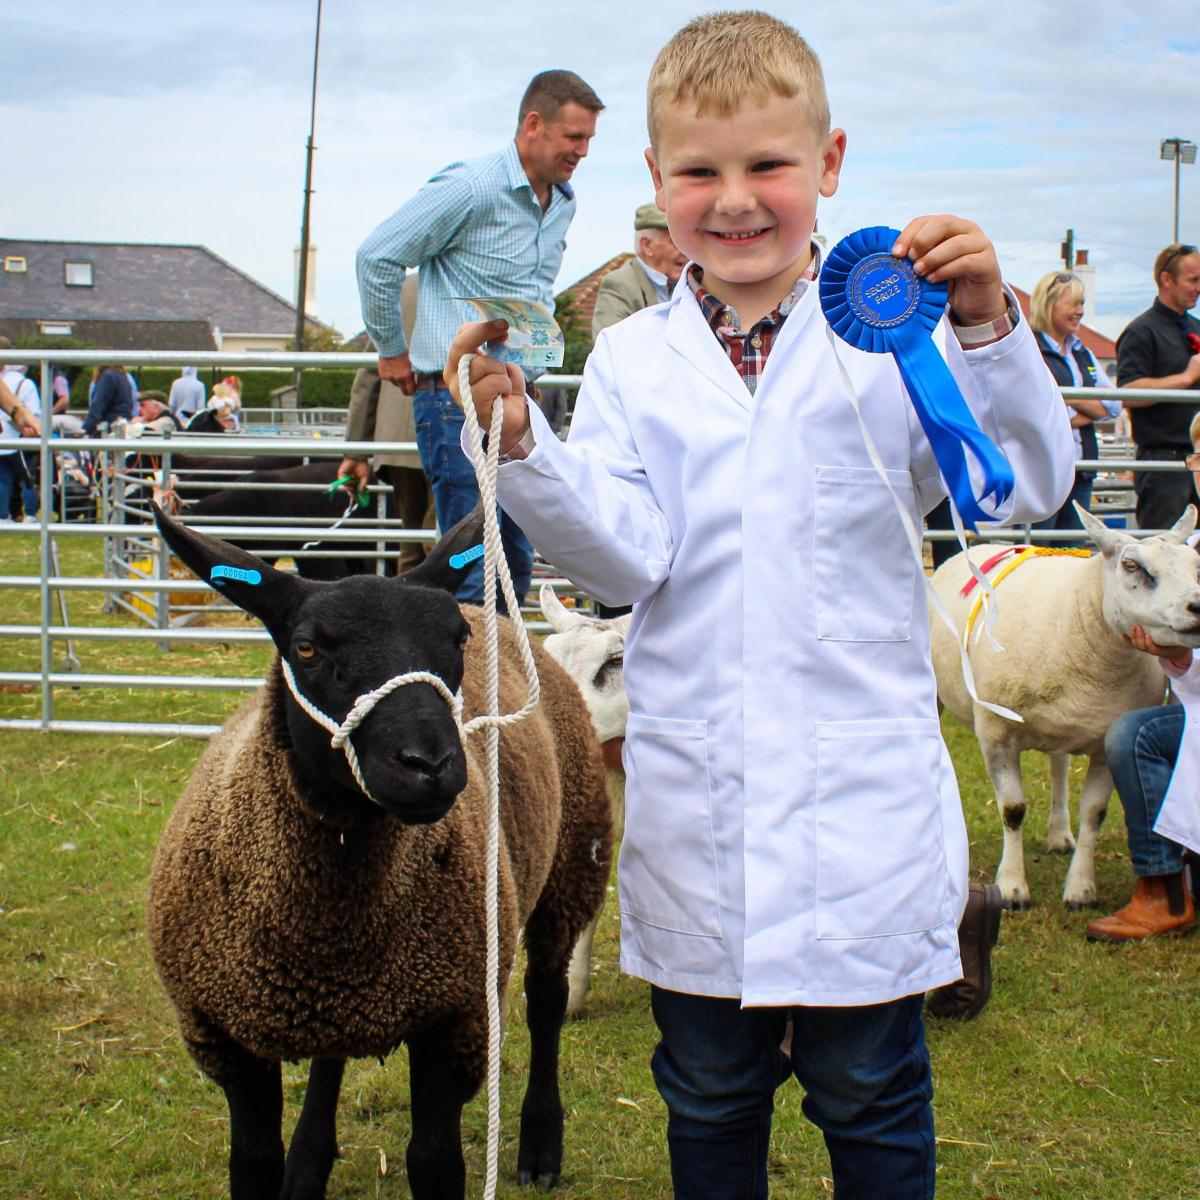 Ben Westby - This is my son Adam Westby, he is 7 years old and this picture is him with his sheep 'Shaun'.